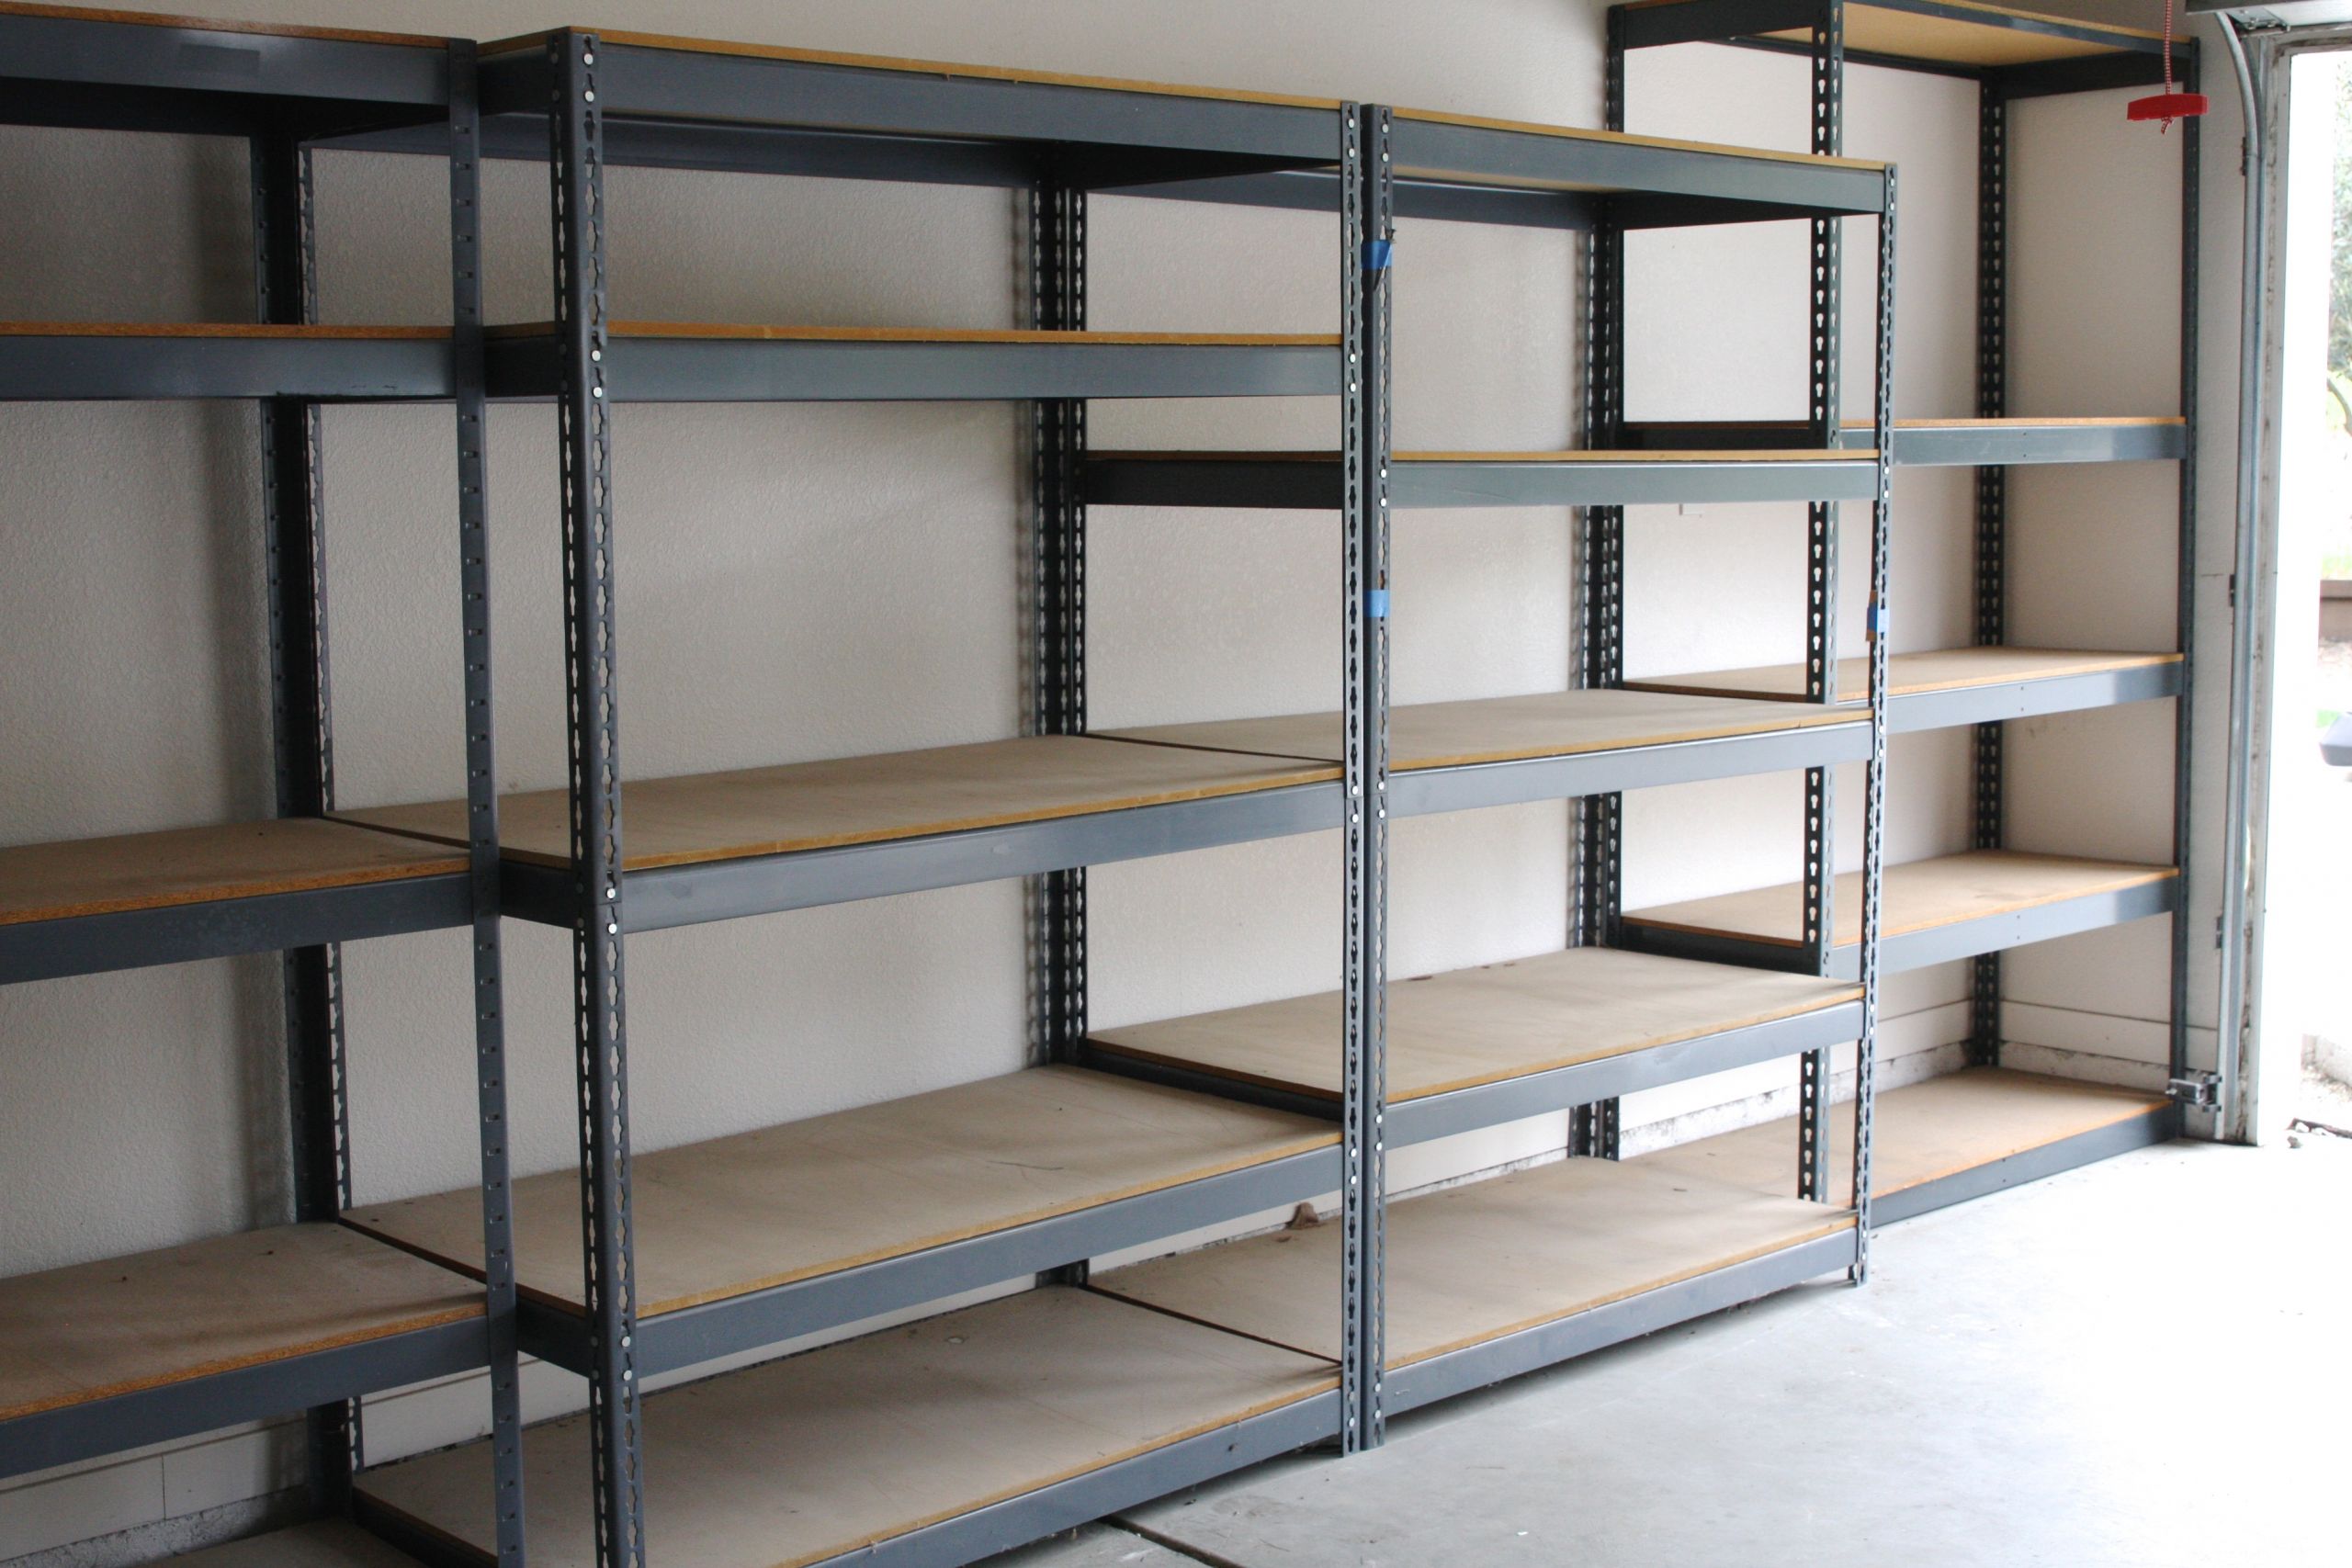 30 Exellent Garage organization Shelves - Home, Family, Style and Art Ideas